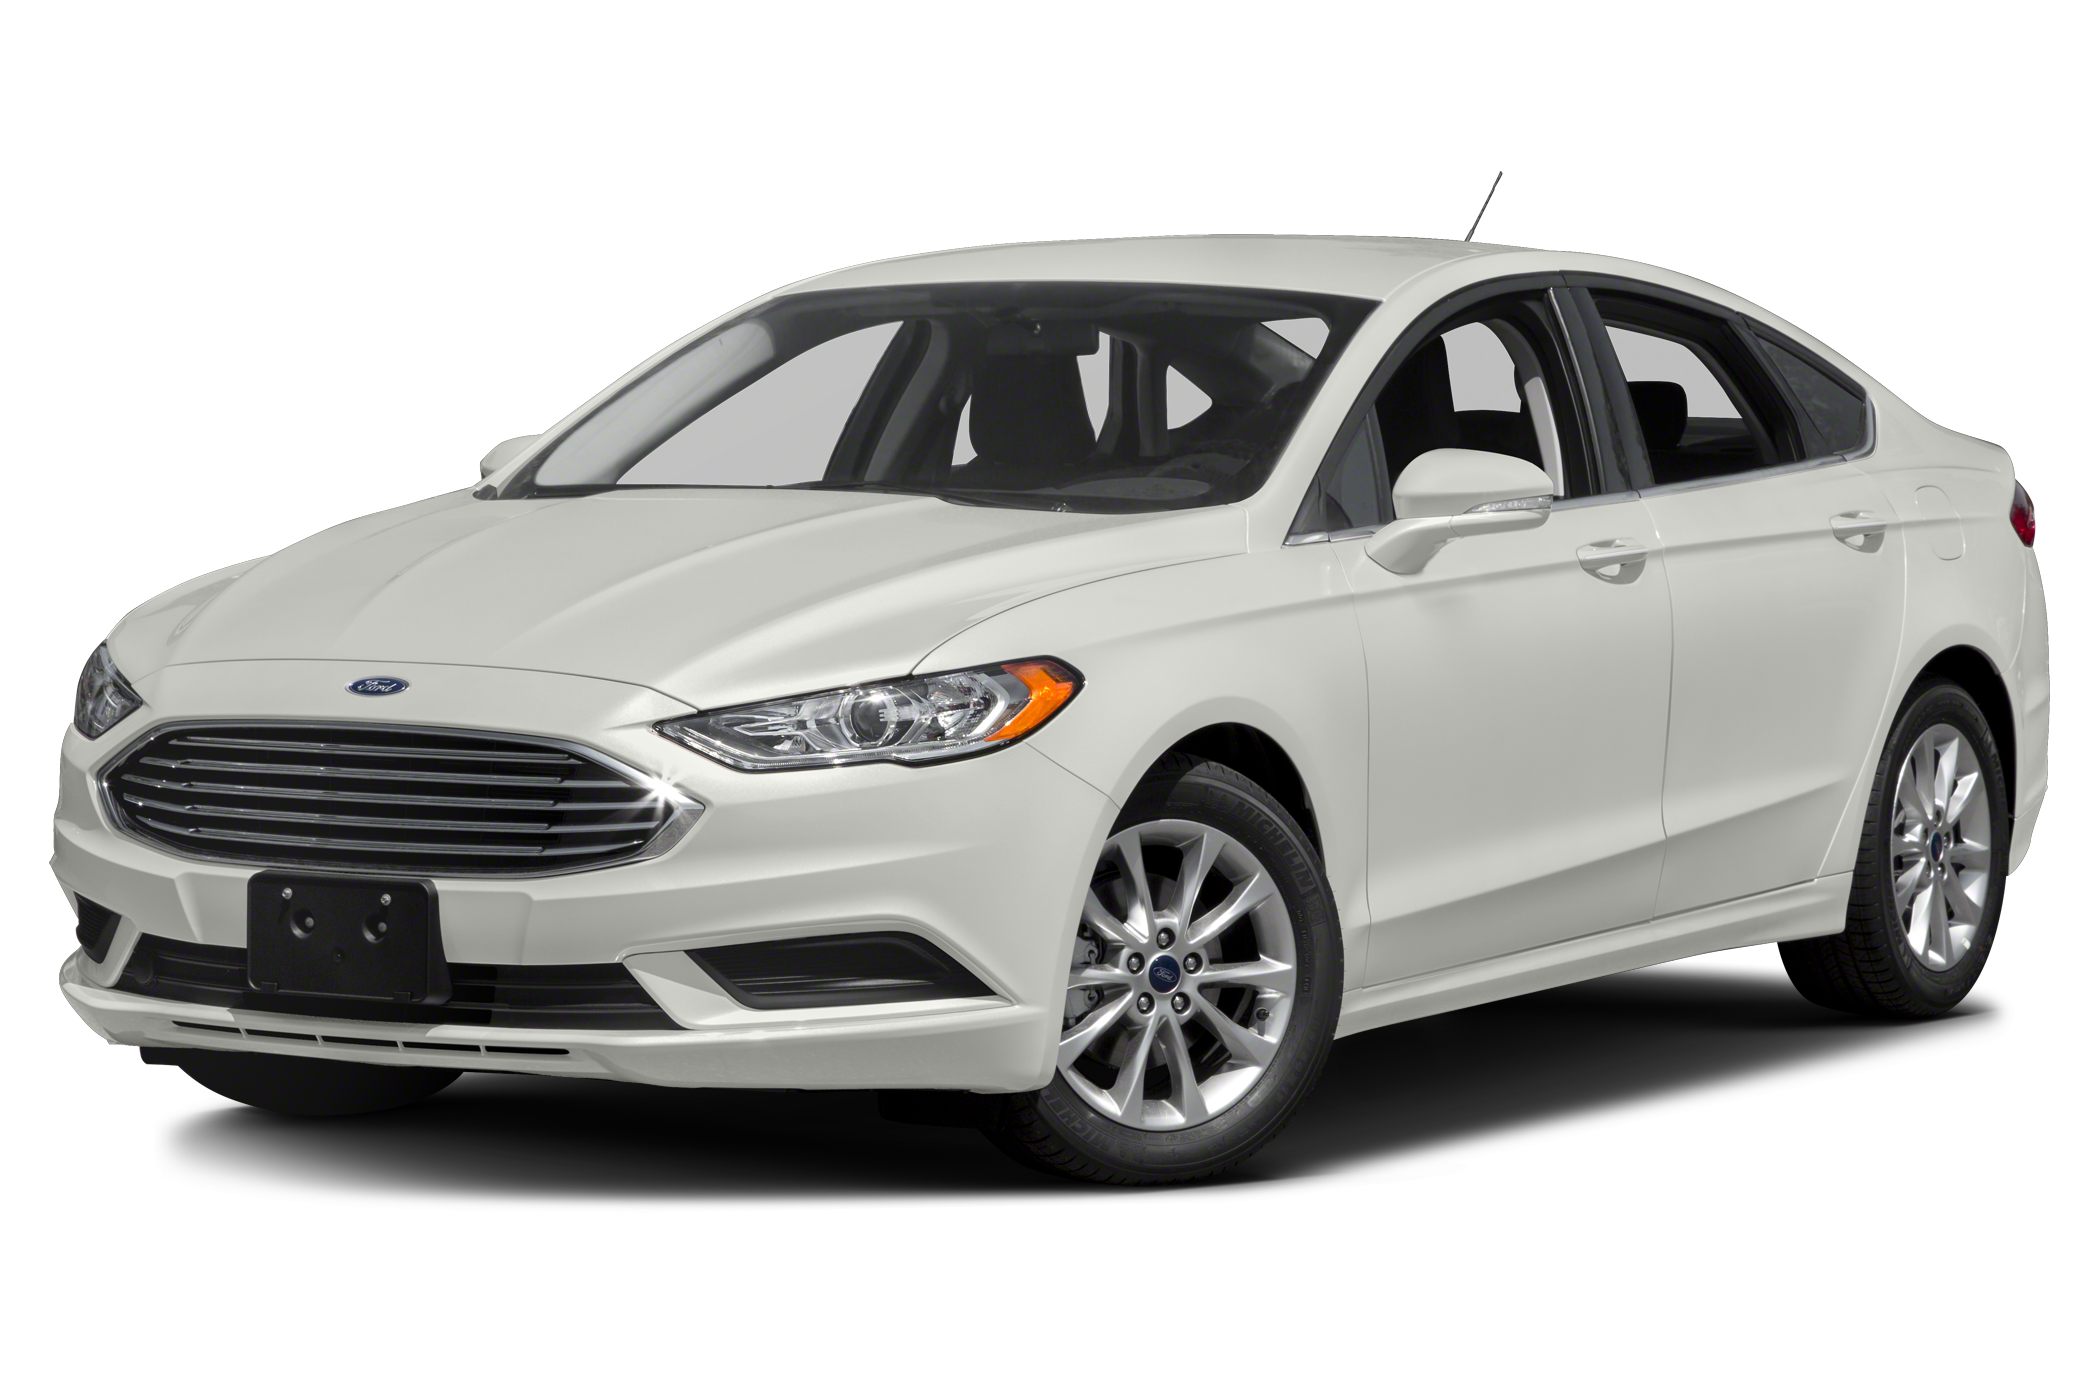 Ford Fusion Wallpapers Vehicles Hq Ford Fusion Pictures 4k Wallpapers 2019